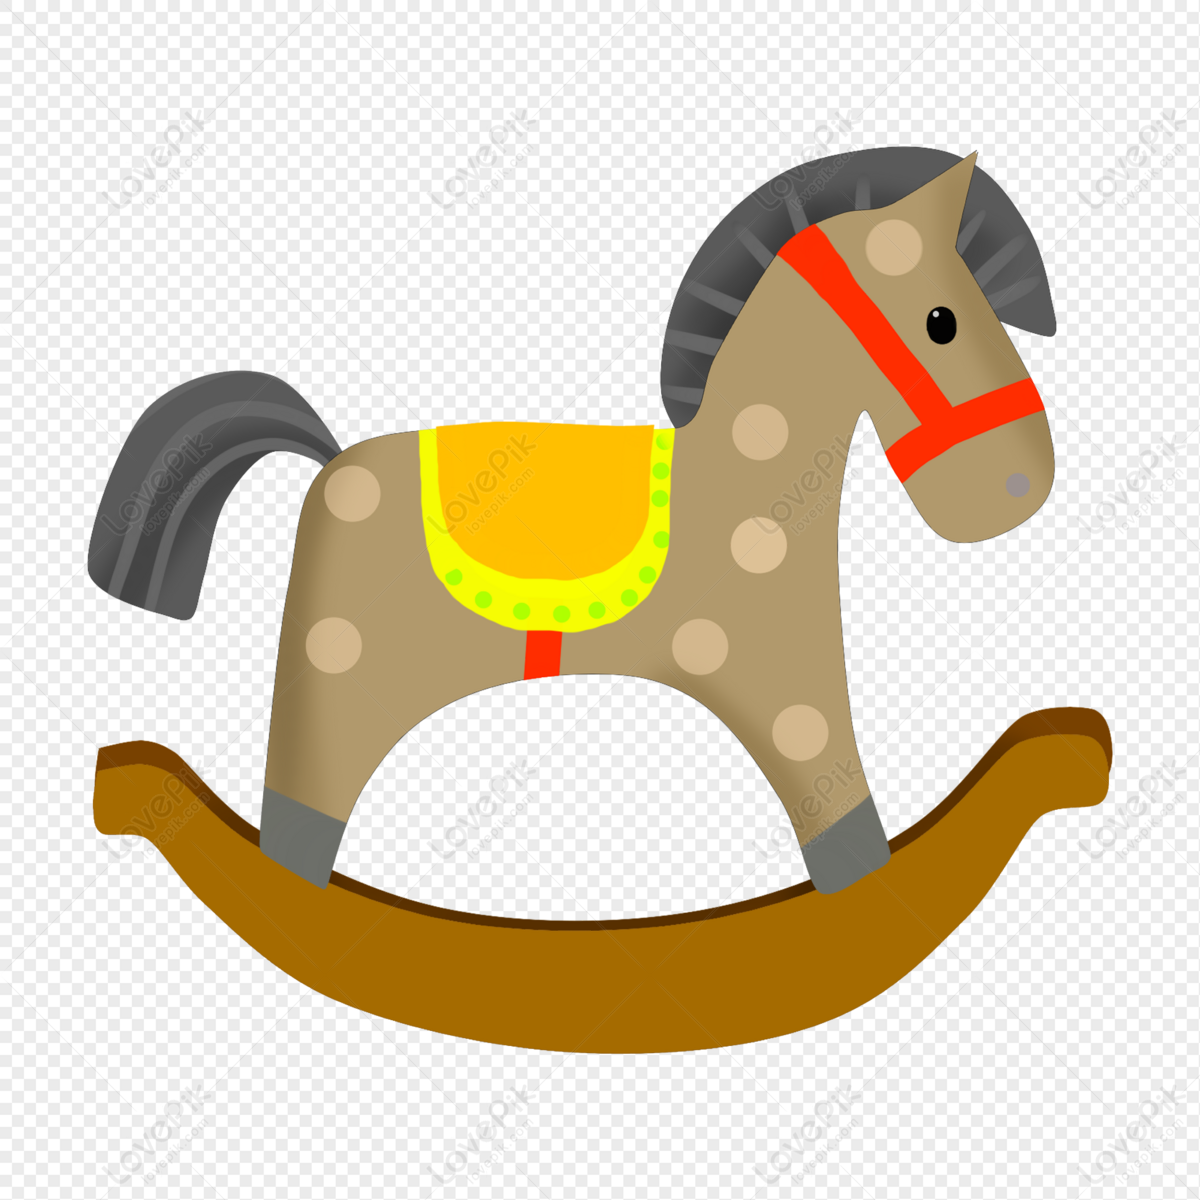 61 Childrens Day Toy Element Wooden Horse PNG Transparent And Clipart Image  For Free Download - Lovepik | 401148656